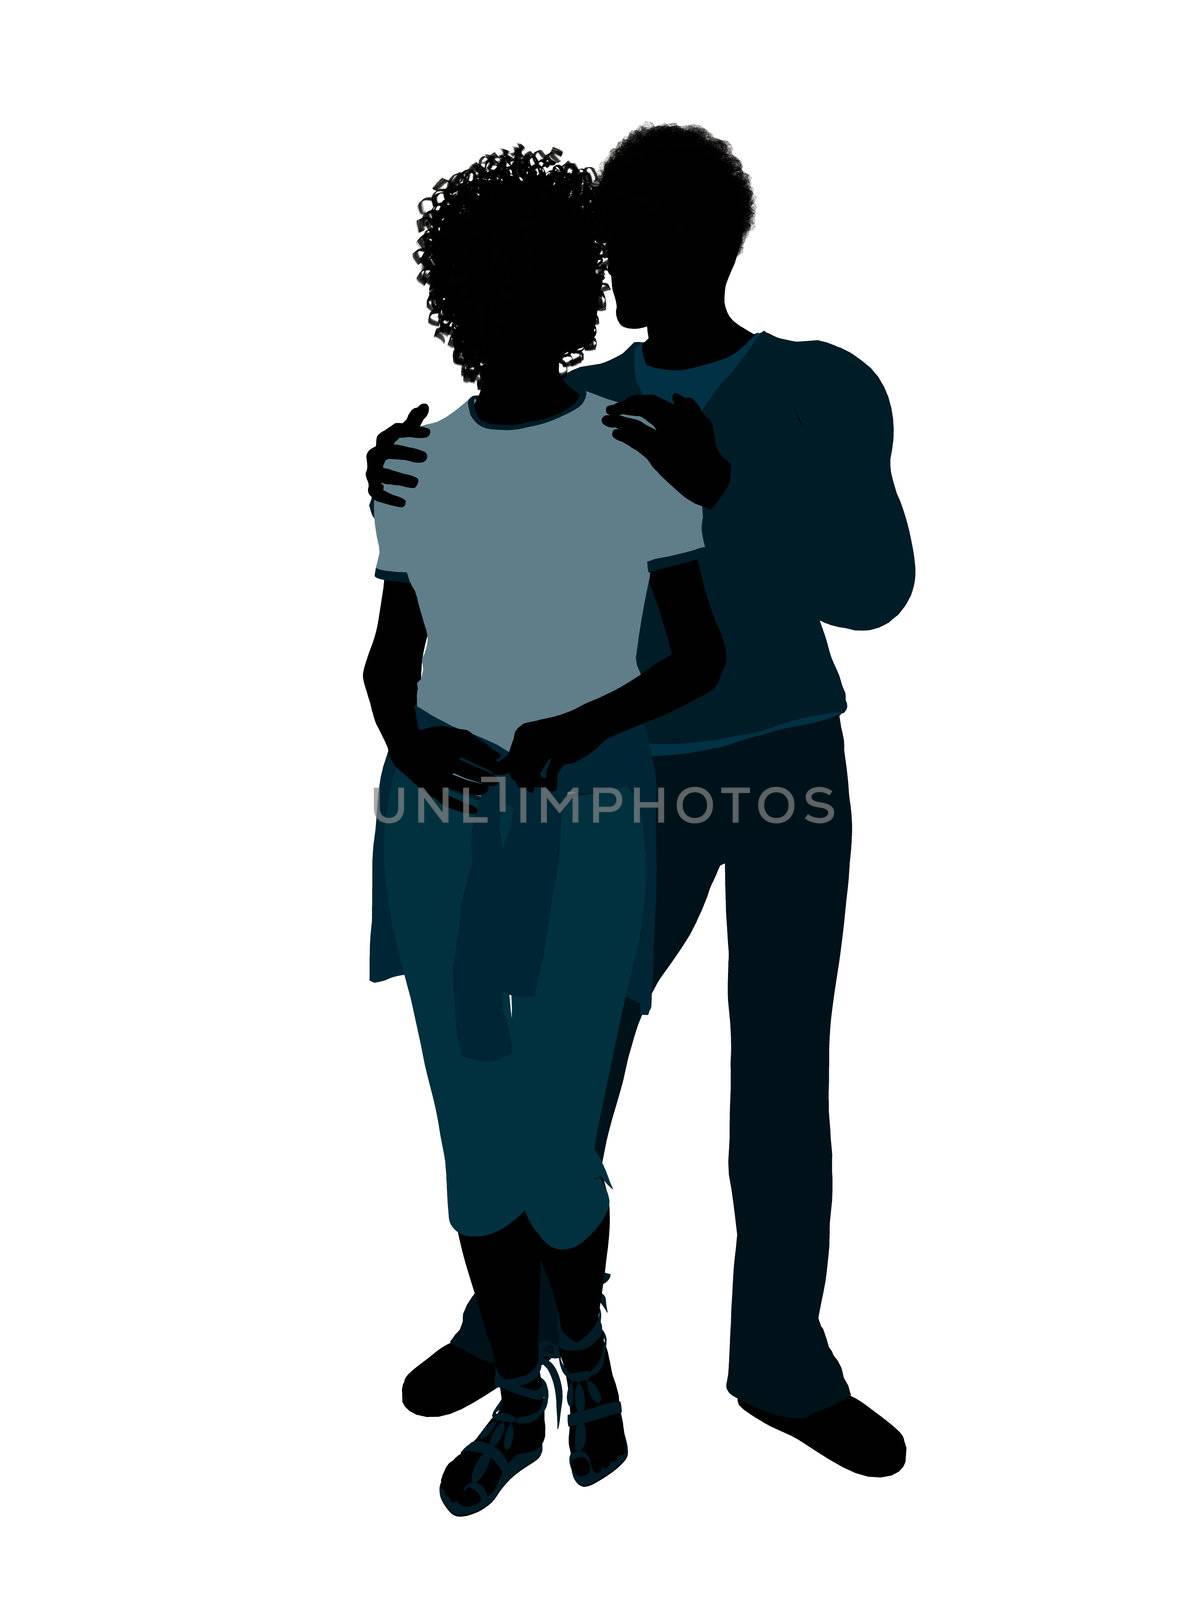 African American Couple Illustration Silhouette by kathygold